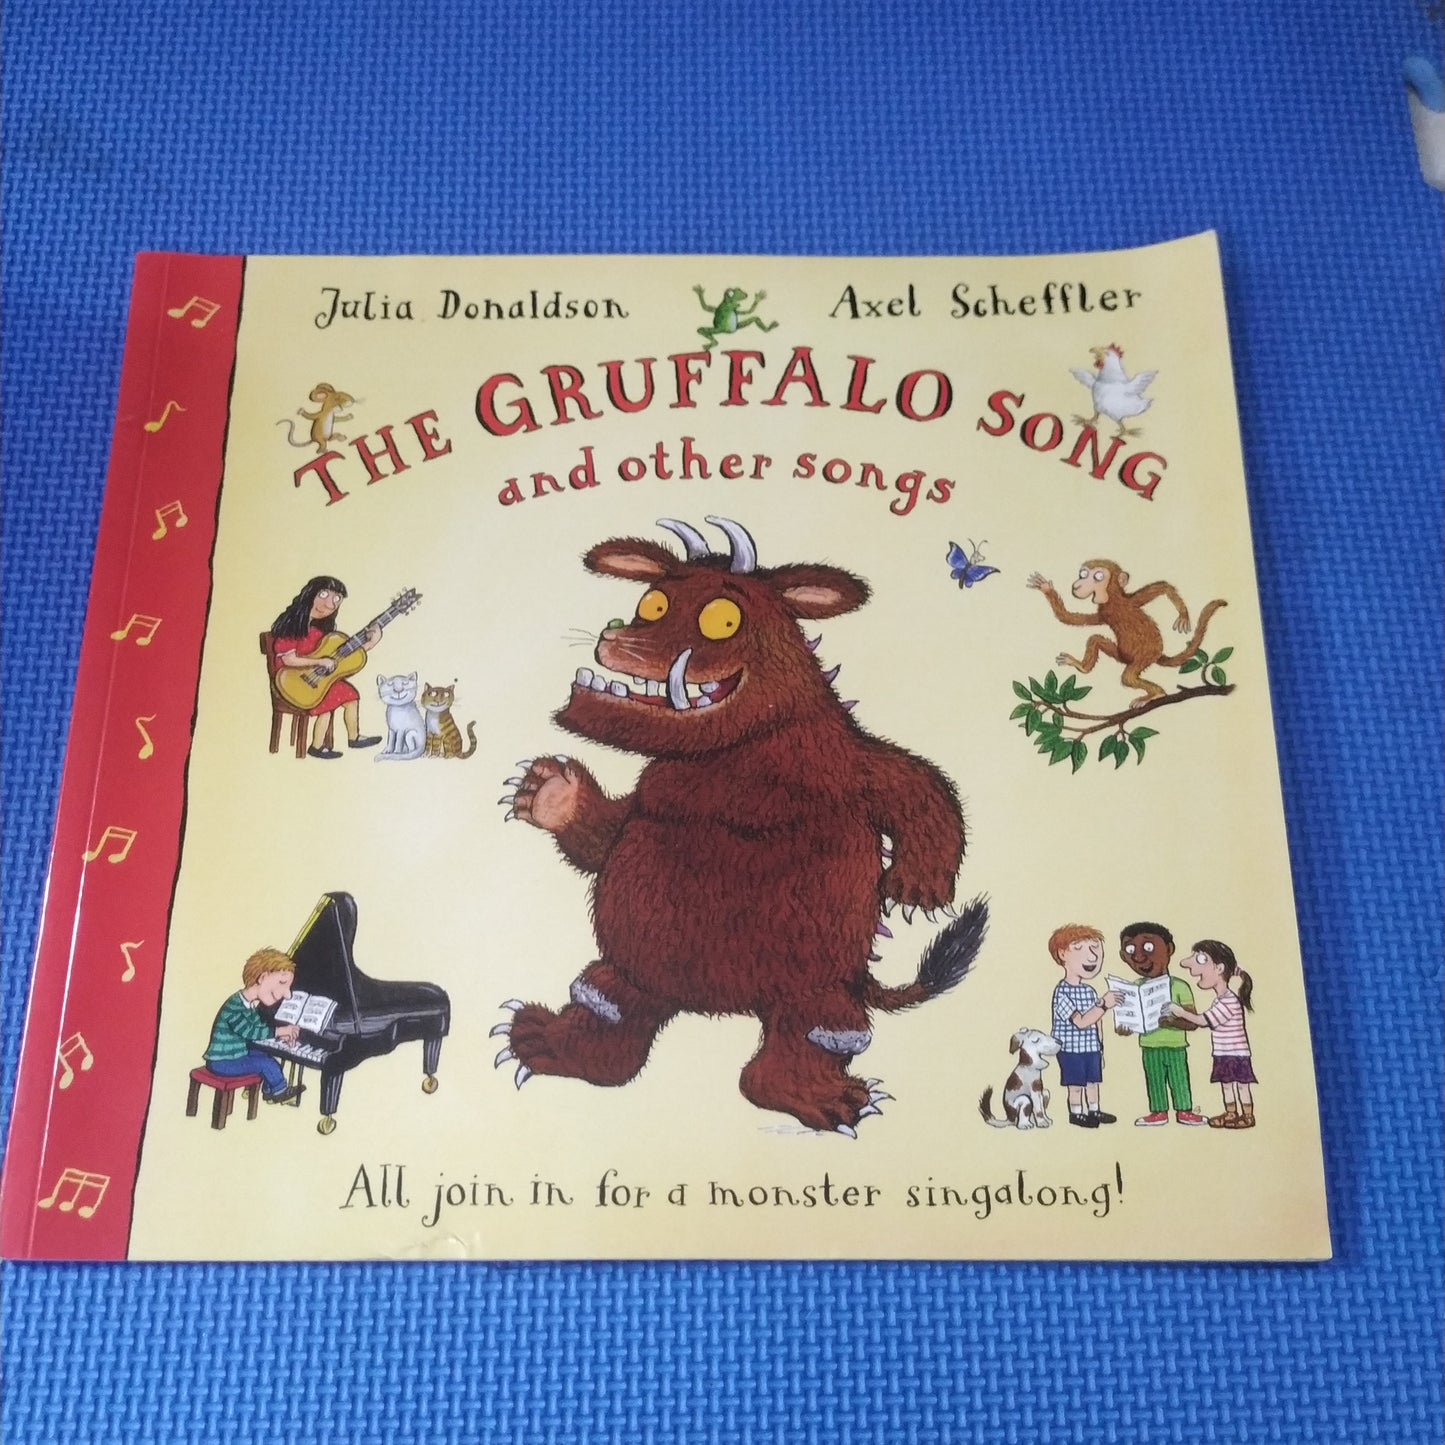 THE GRUFFALO SONG and other song